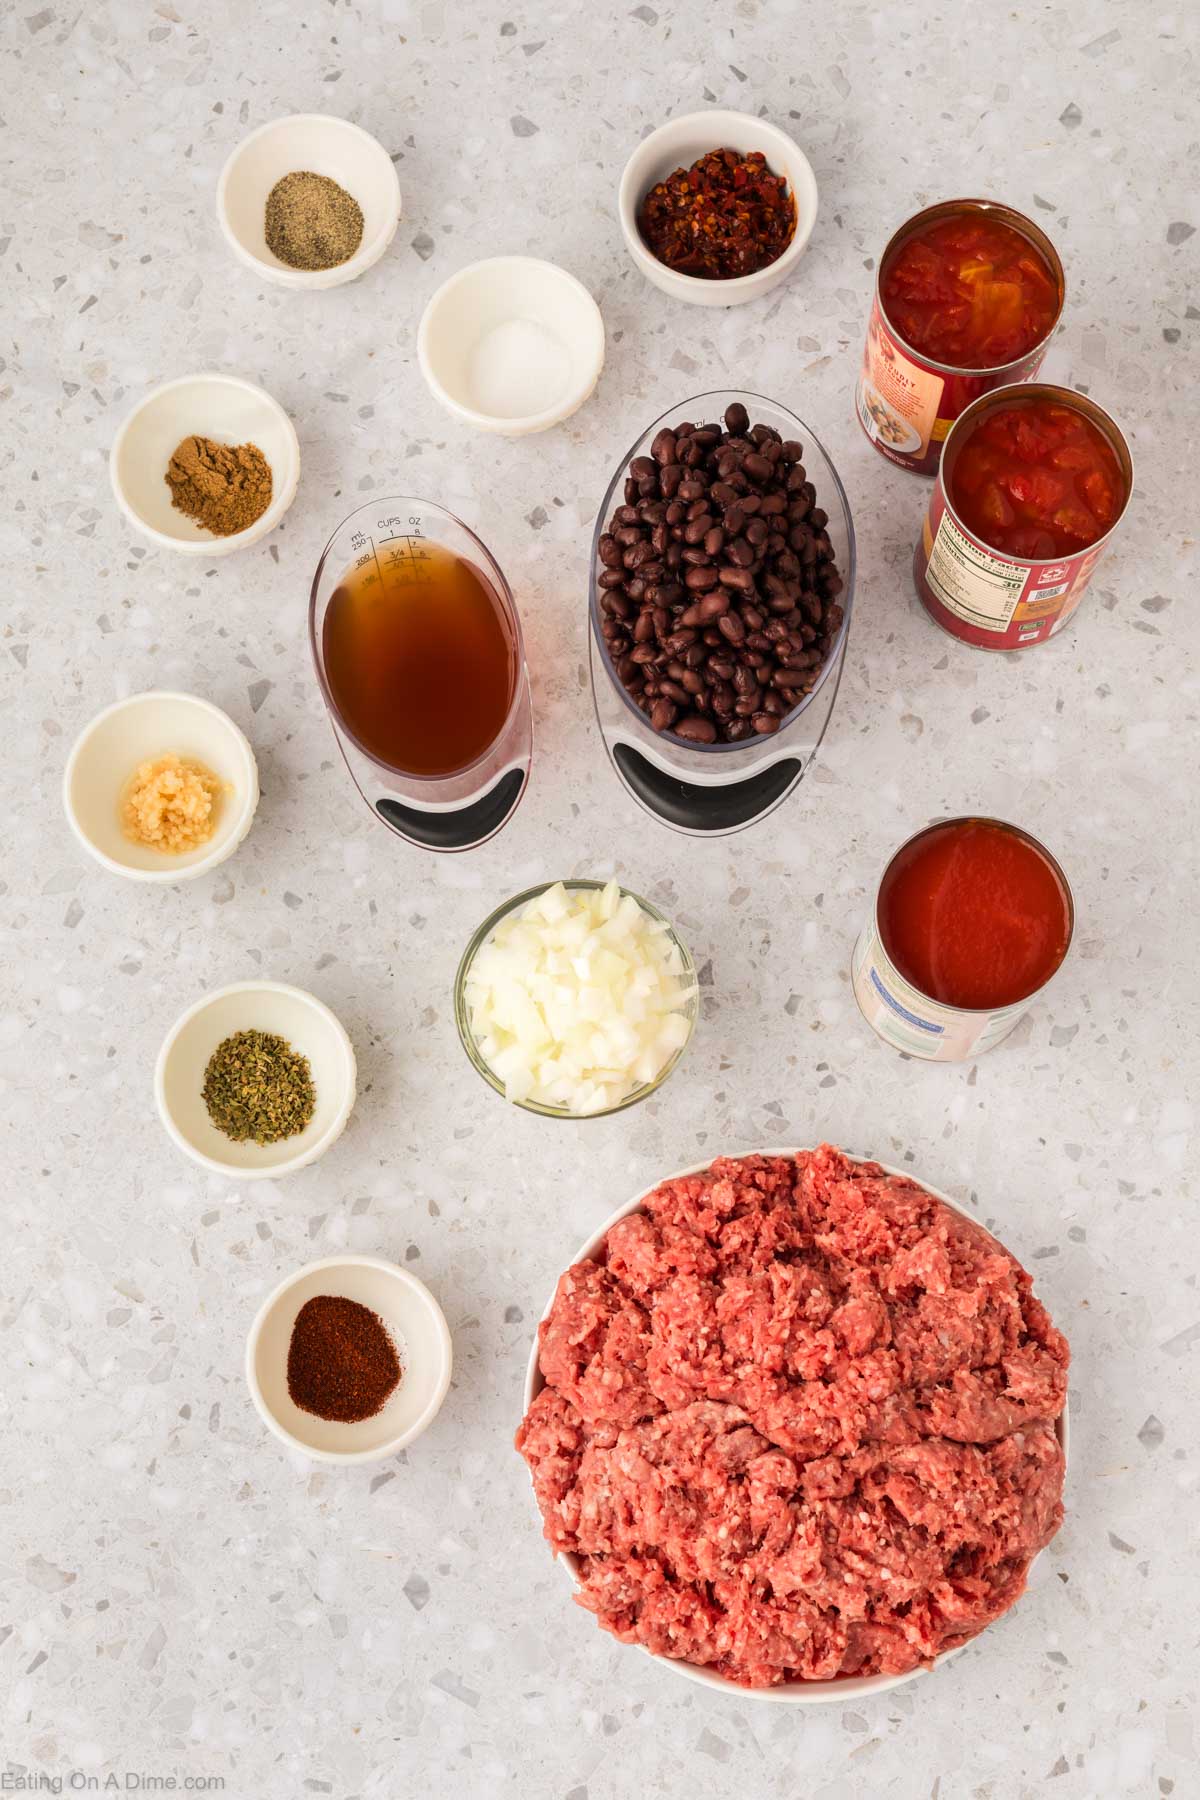 Ingredients for Chipotle Chili - Ground Beef, Onion, Garlic, diced tomatoes, tomato sauce, black beans, chipotle chiles peppers, beef broth, chili powder, oregano, cumin, salt and pepper